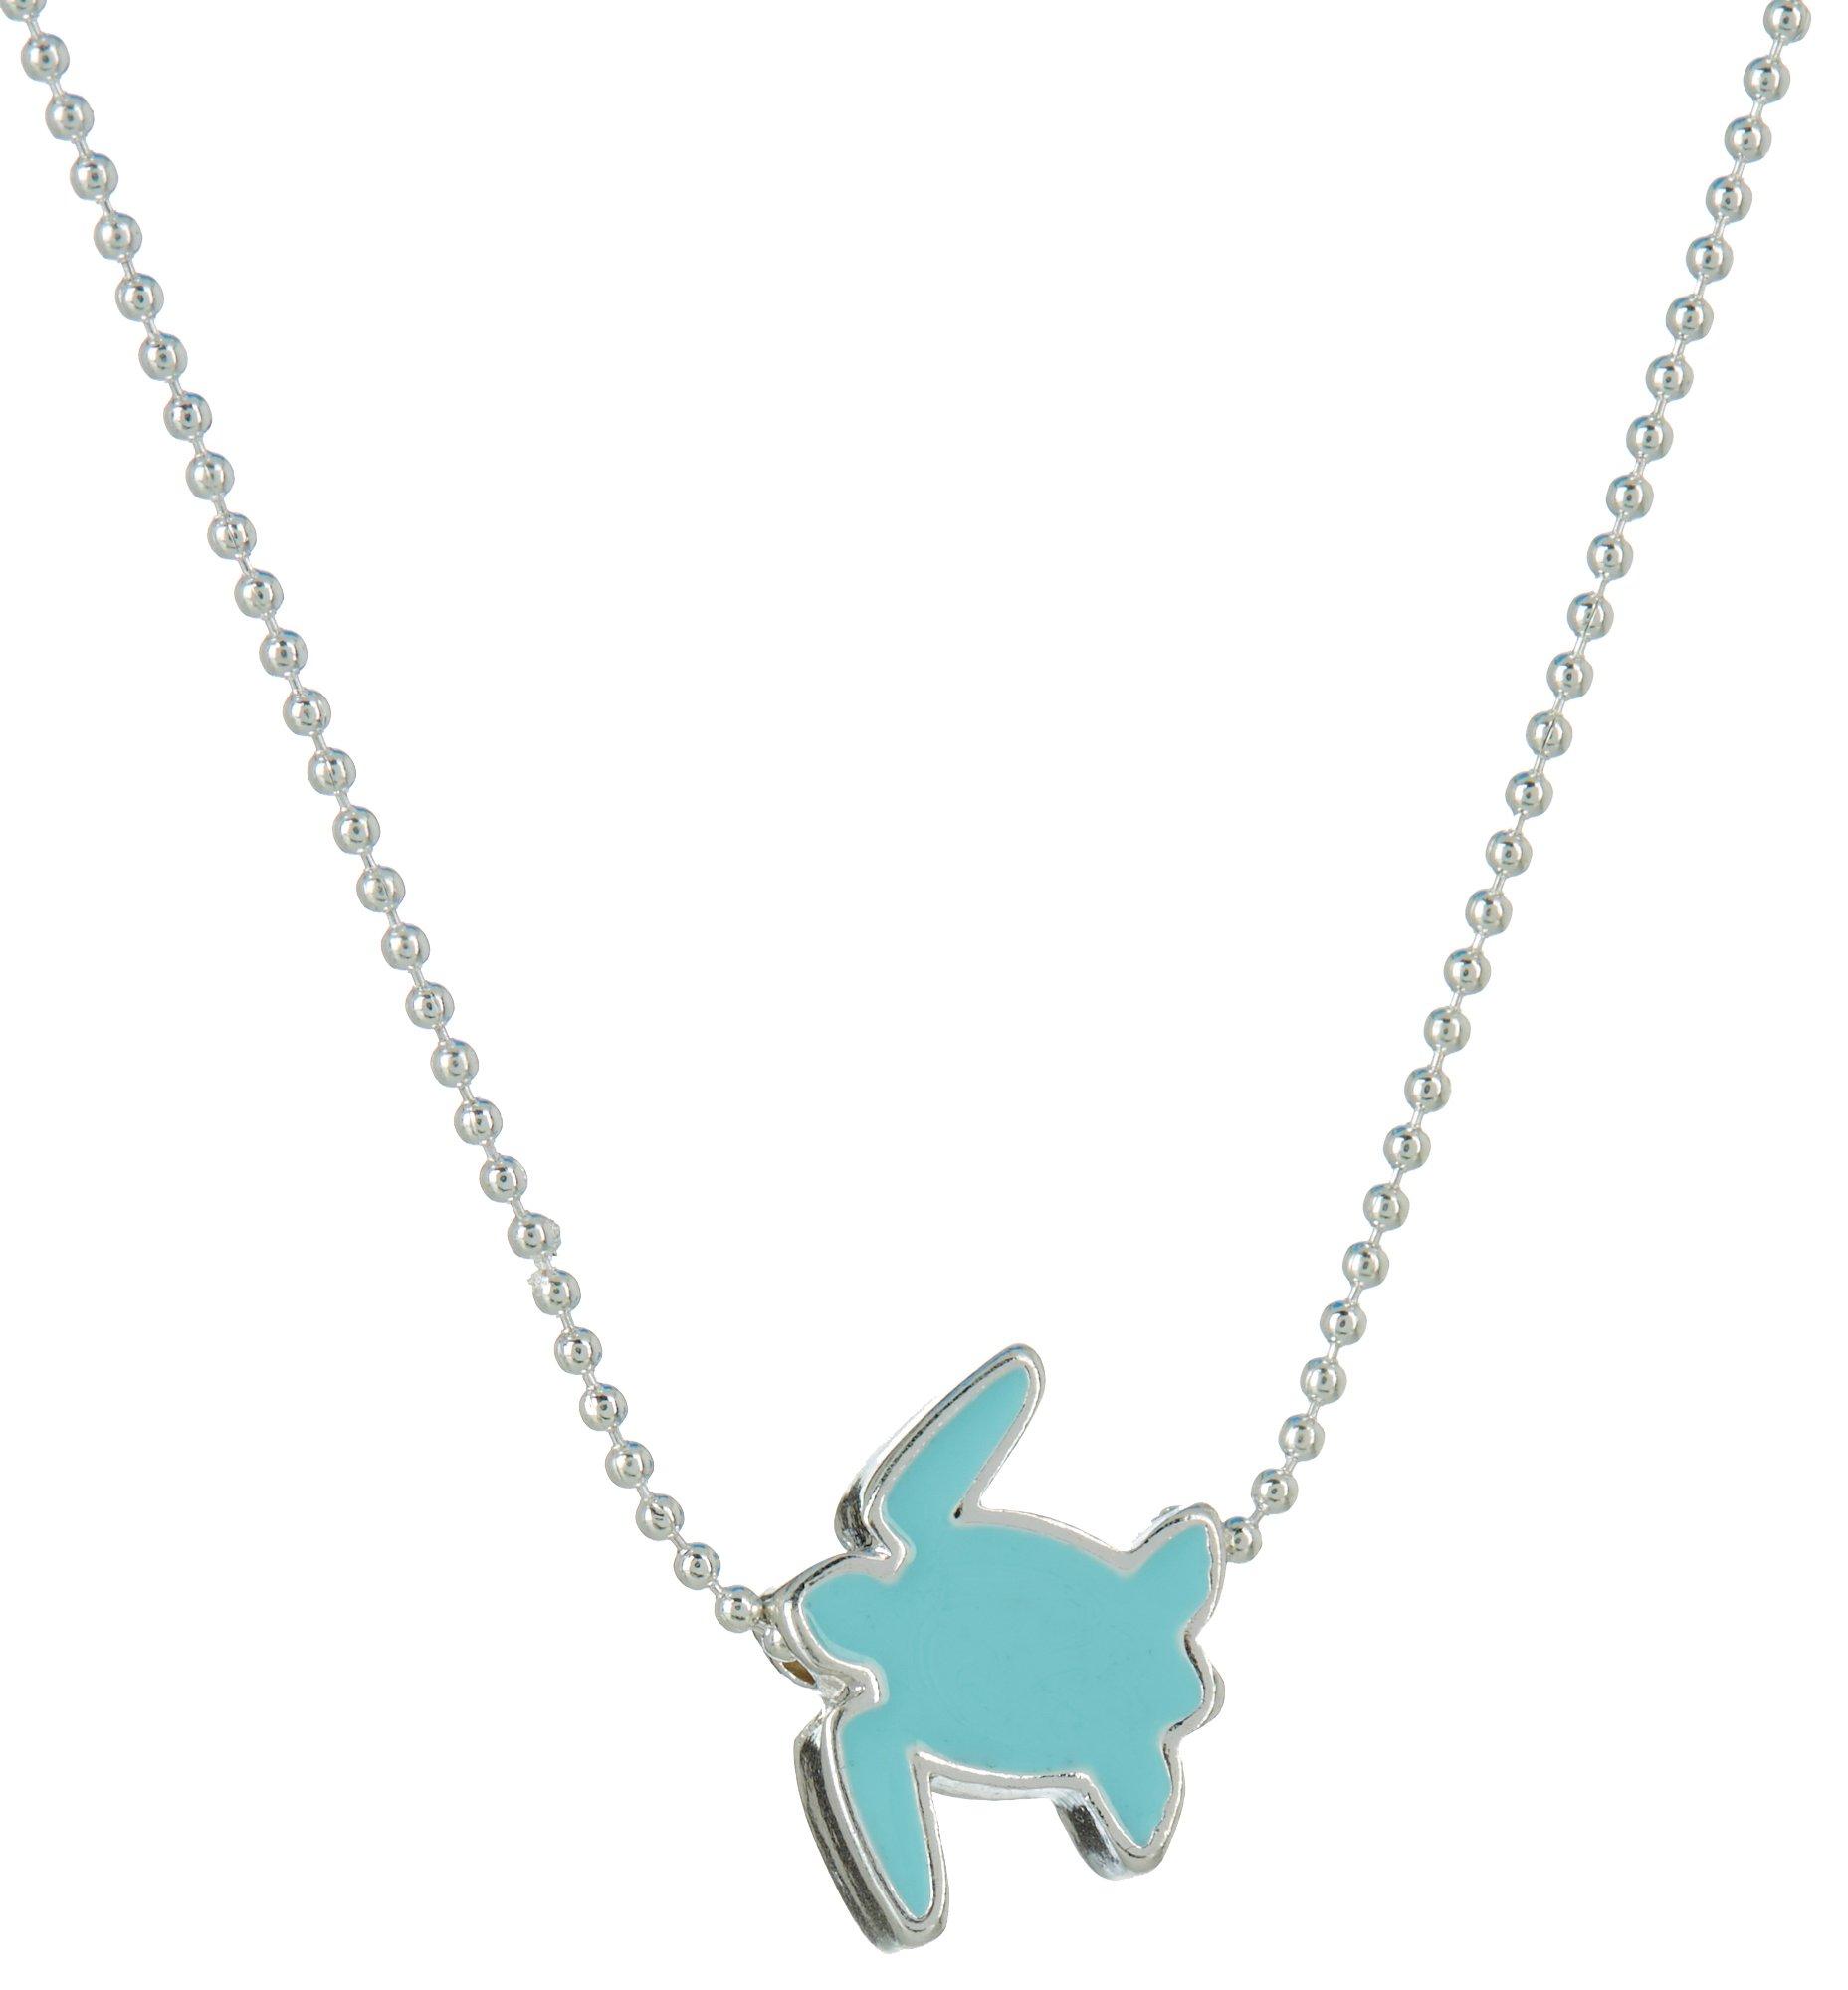 Viva Life Enamel Turtle Charm 16 In. Chain Necklace